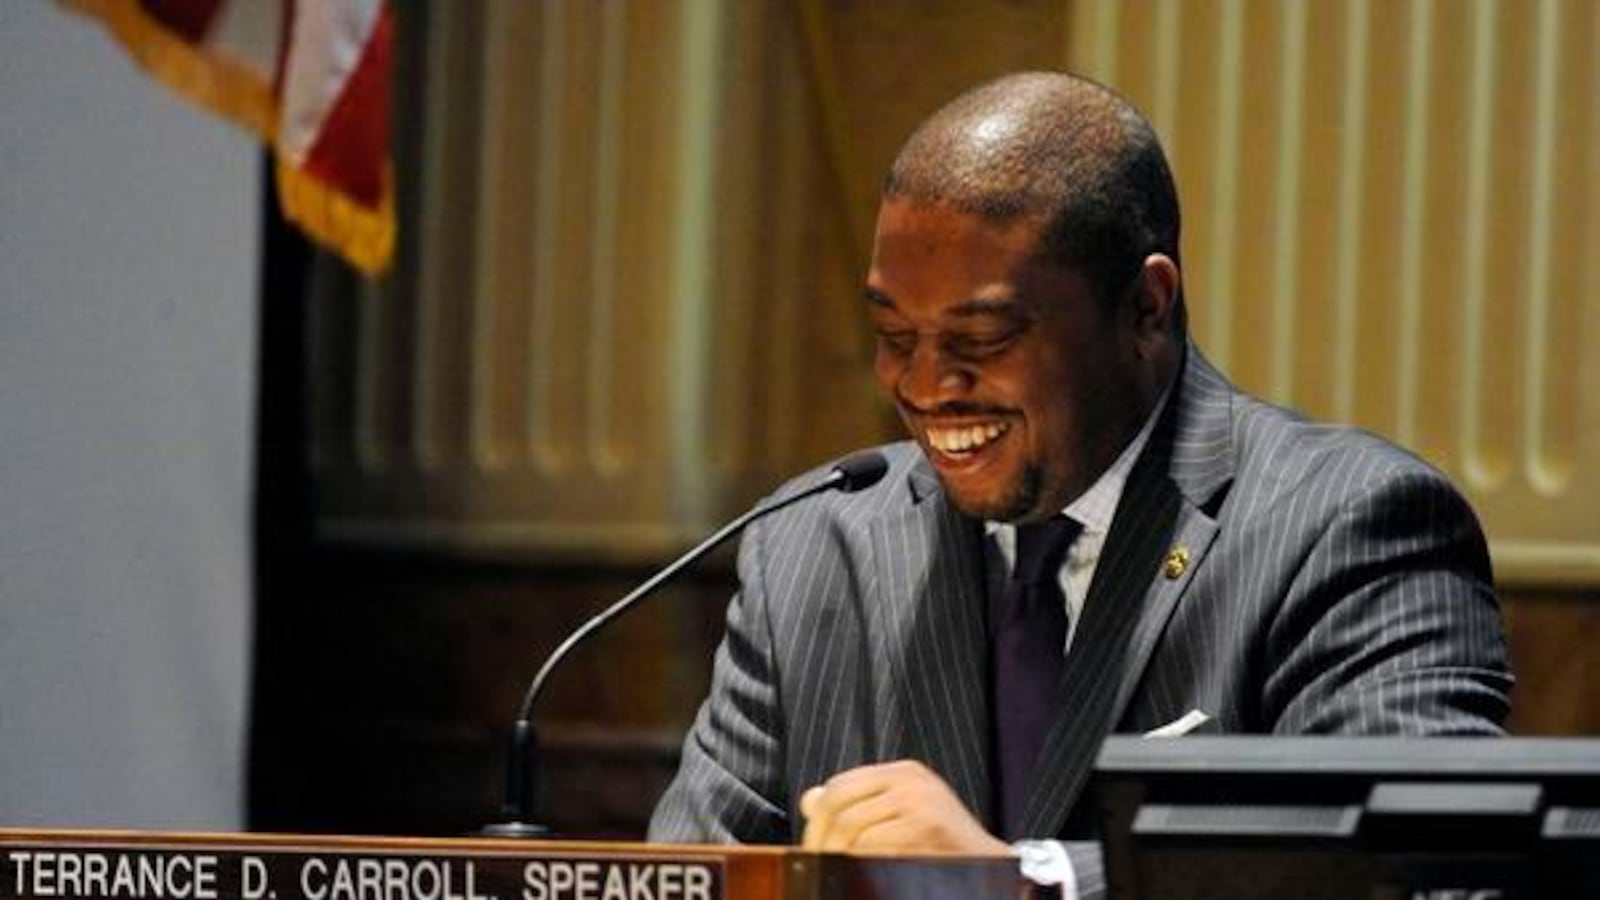 Former Speaker of the House Terrance Carroll conducts his last session in 2010. (Denver Post)